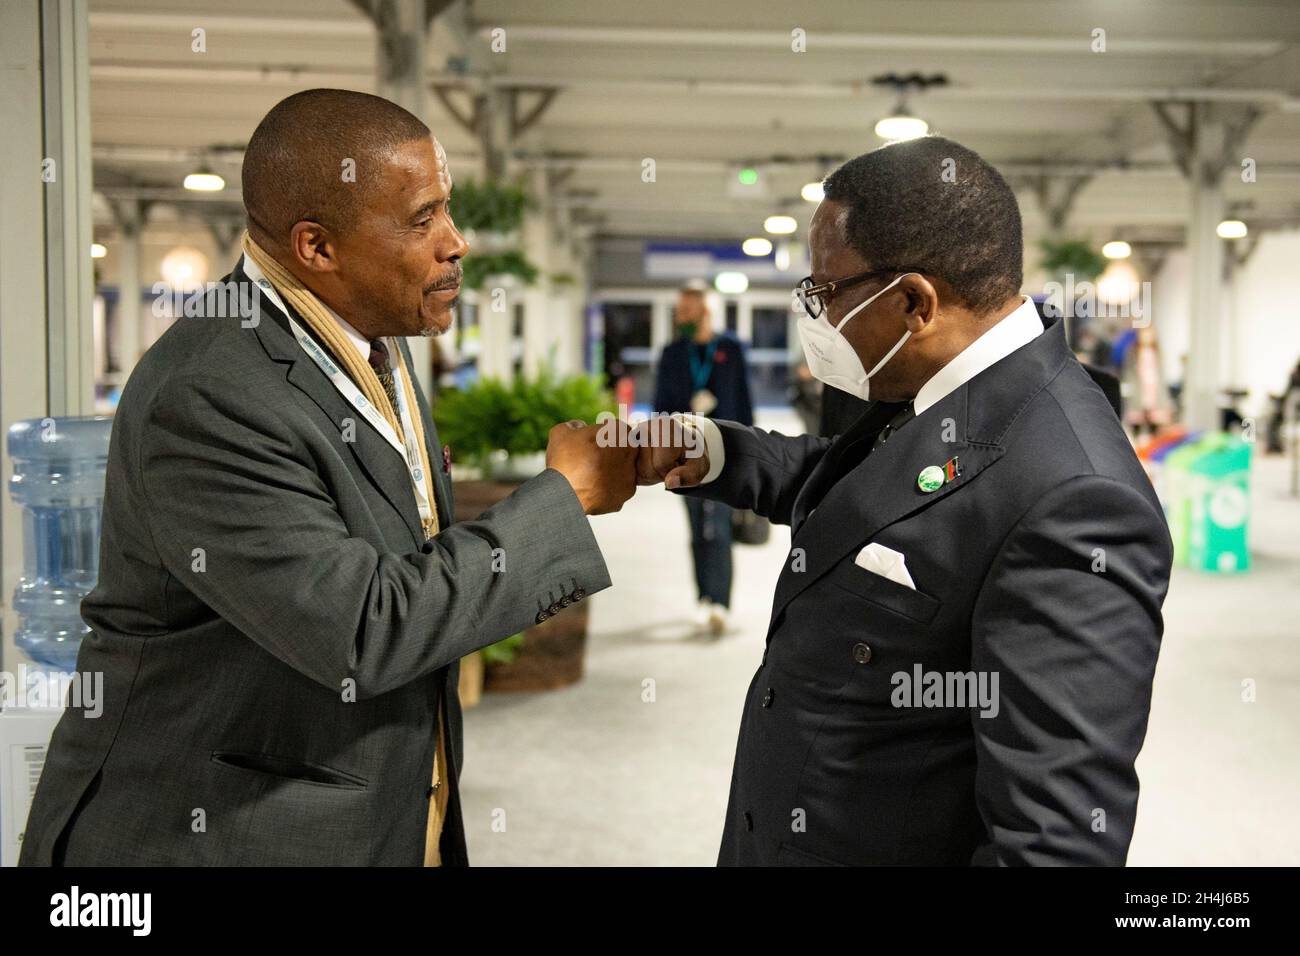 Glasgow, Scotland, UK. 2 November 2021 PICTURED: (right) President Lazarus Chakwera, President of Malawi seen at COP26 fist pumping a delegate. The president of the Republic of Malawi (Chichewa: Mtsogoleri wa Dziko la Malawi) is the head of state and head of government of Malawi. The president leads the executive branch of the Government of Malawi and is the commander-in-chief of the Malawian Defence Force. The current president is Lazarus Chakwera, who defeated Peter Mutharika in the 2020 rerun presidential election. Chakwera was sworn in as president of Malawi on 28 June. Credit: Colin Fishe Stock Photo